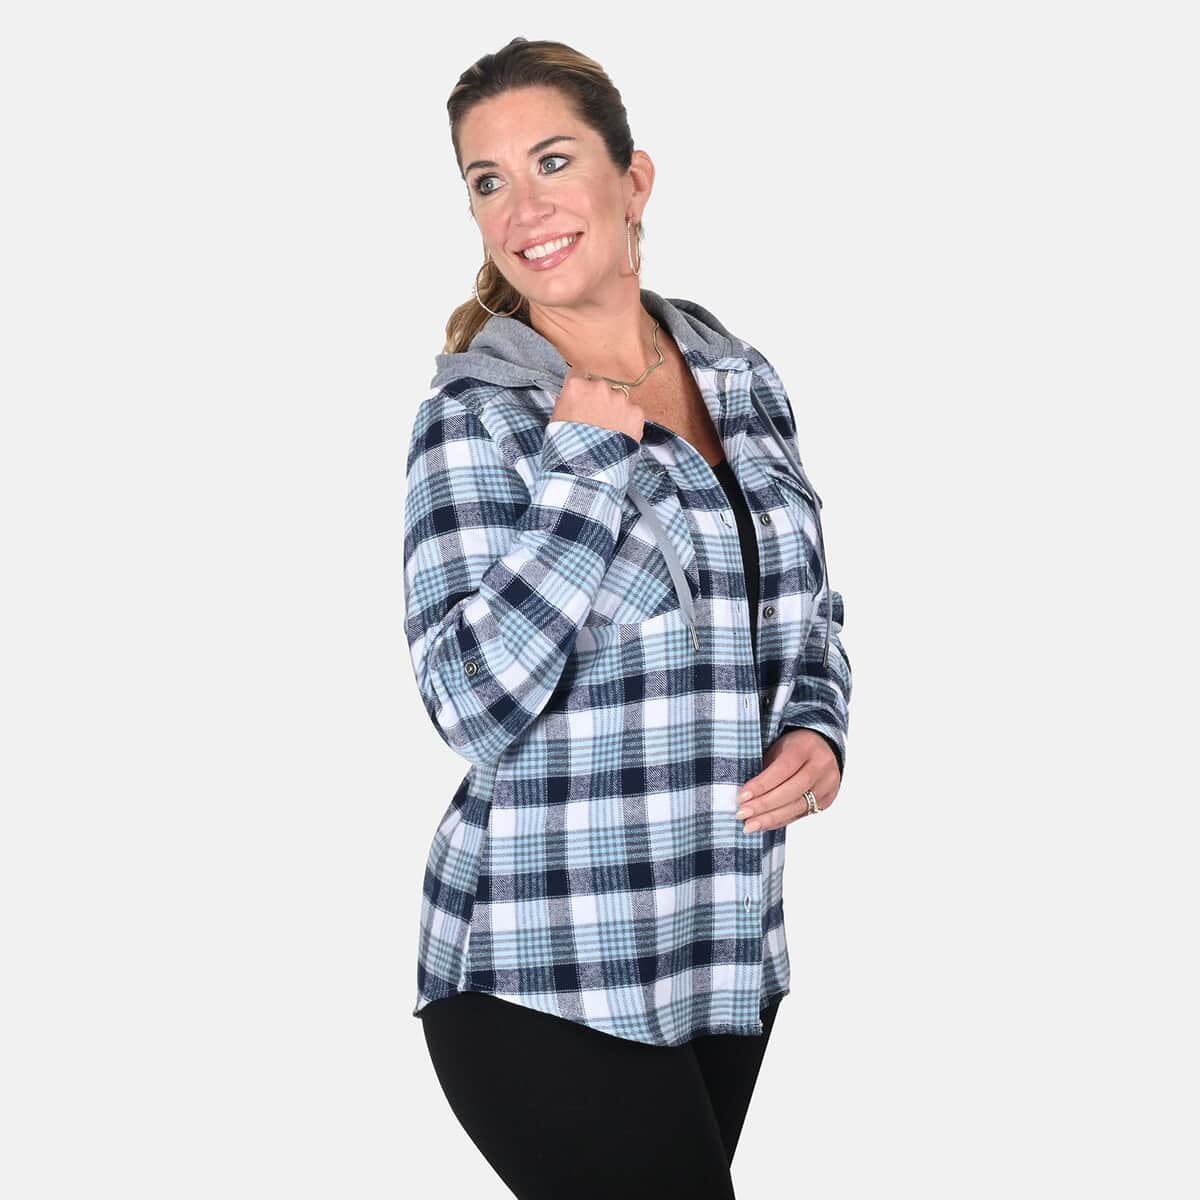 Victory Sportswear Blue and White Plaid Pattern Cotton Shirt with Fleece Hood -M image number 4